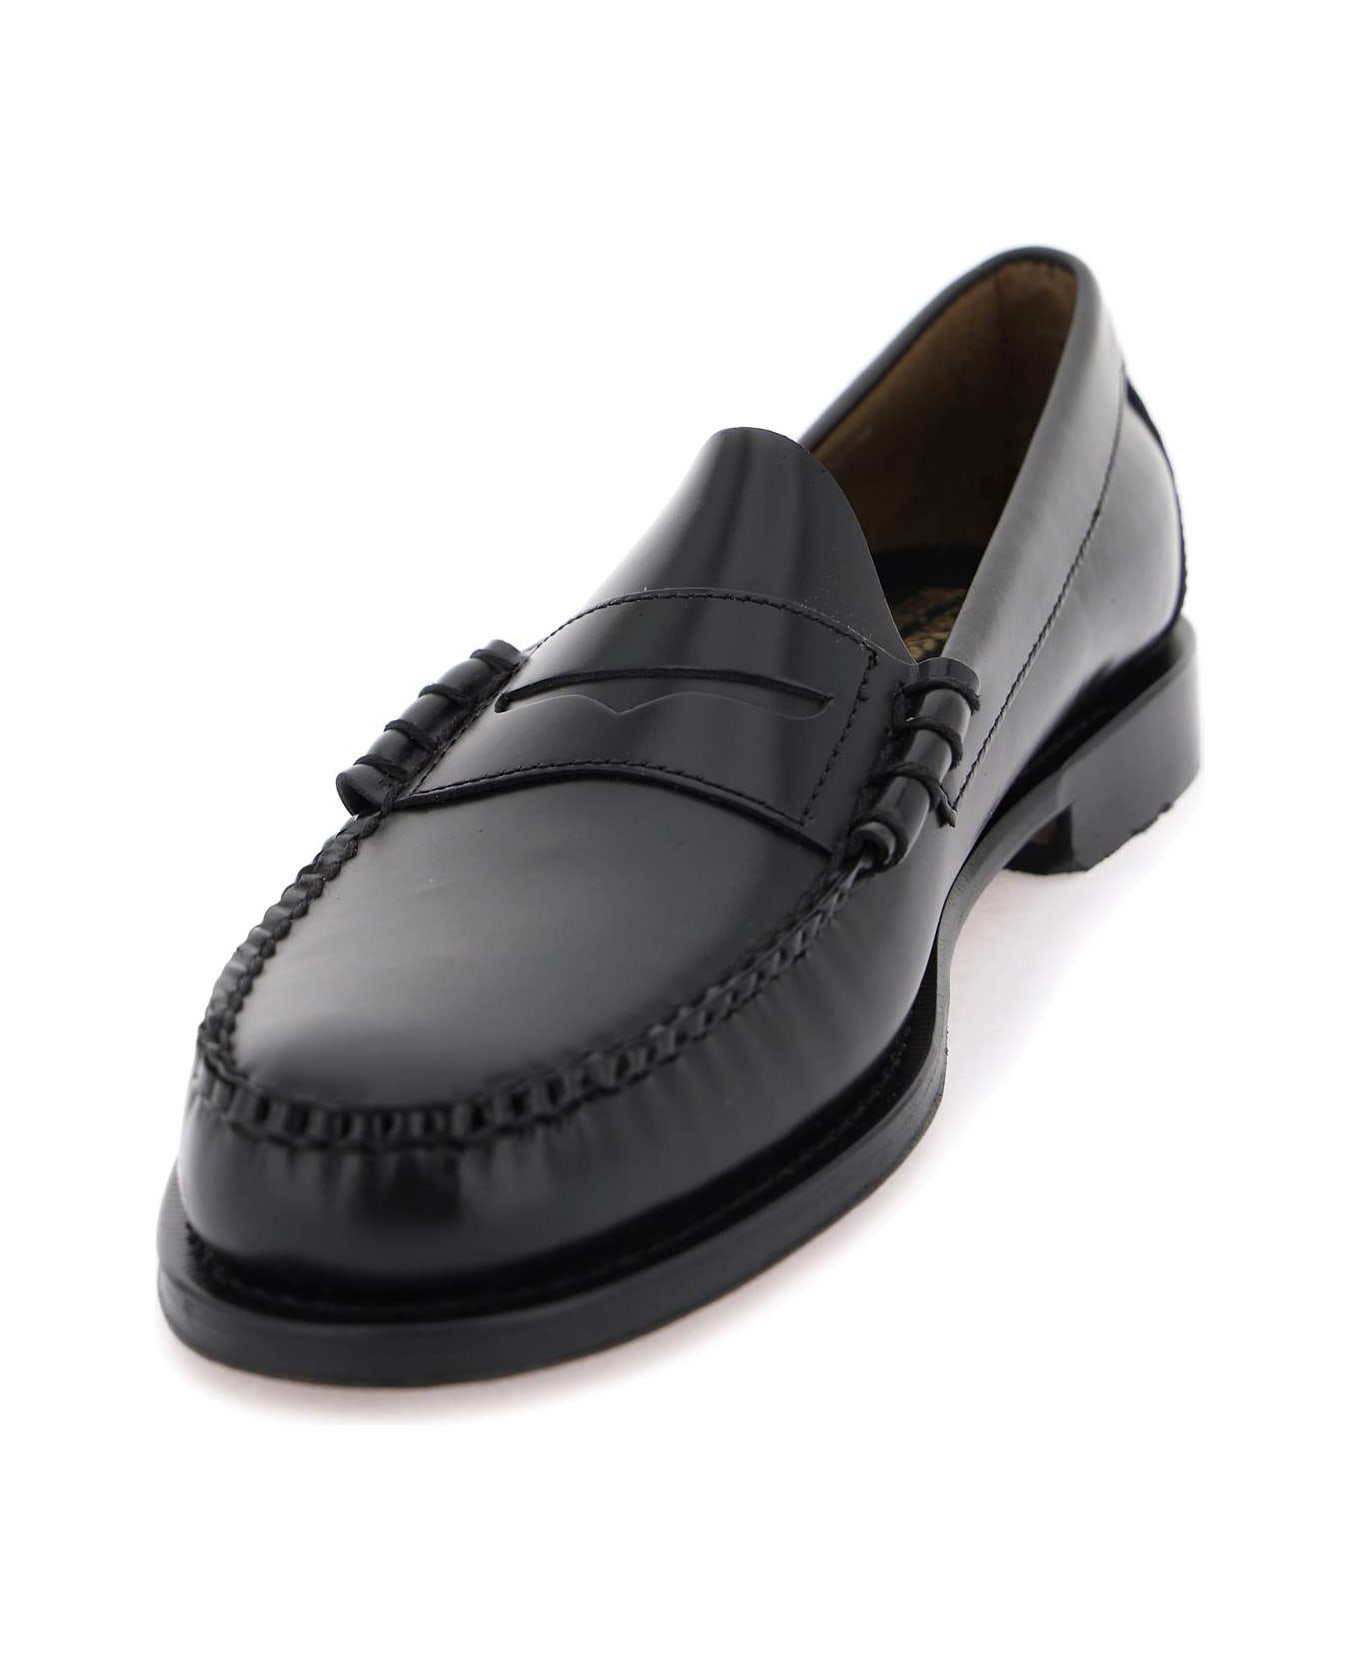 G.H.Bass & Co. Weejuns Larson Penny Loafers - BLACK (Black)